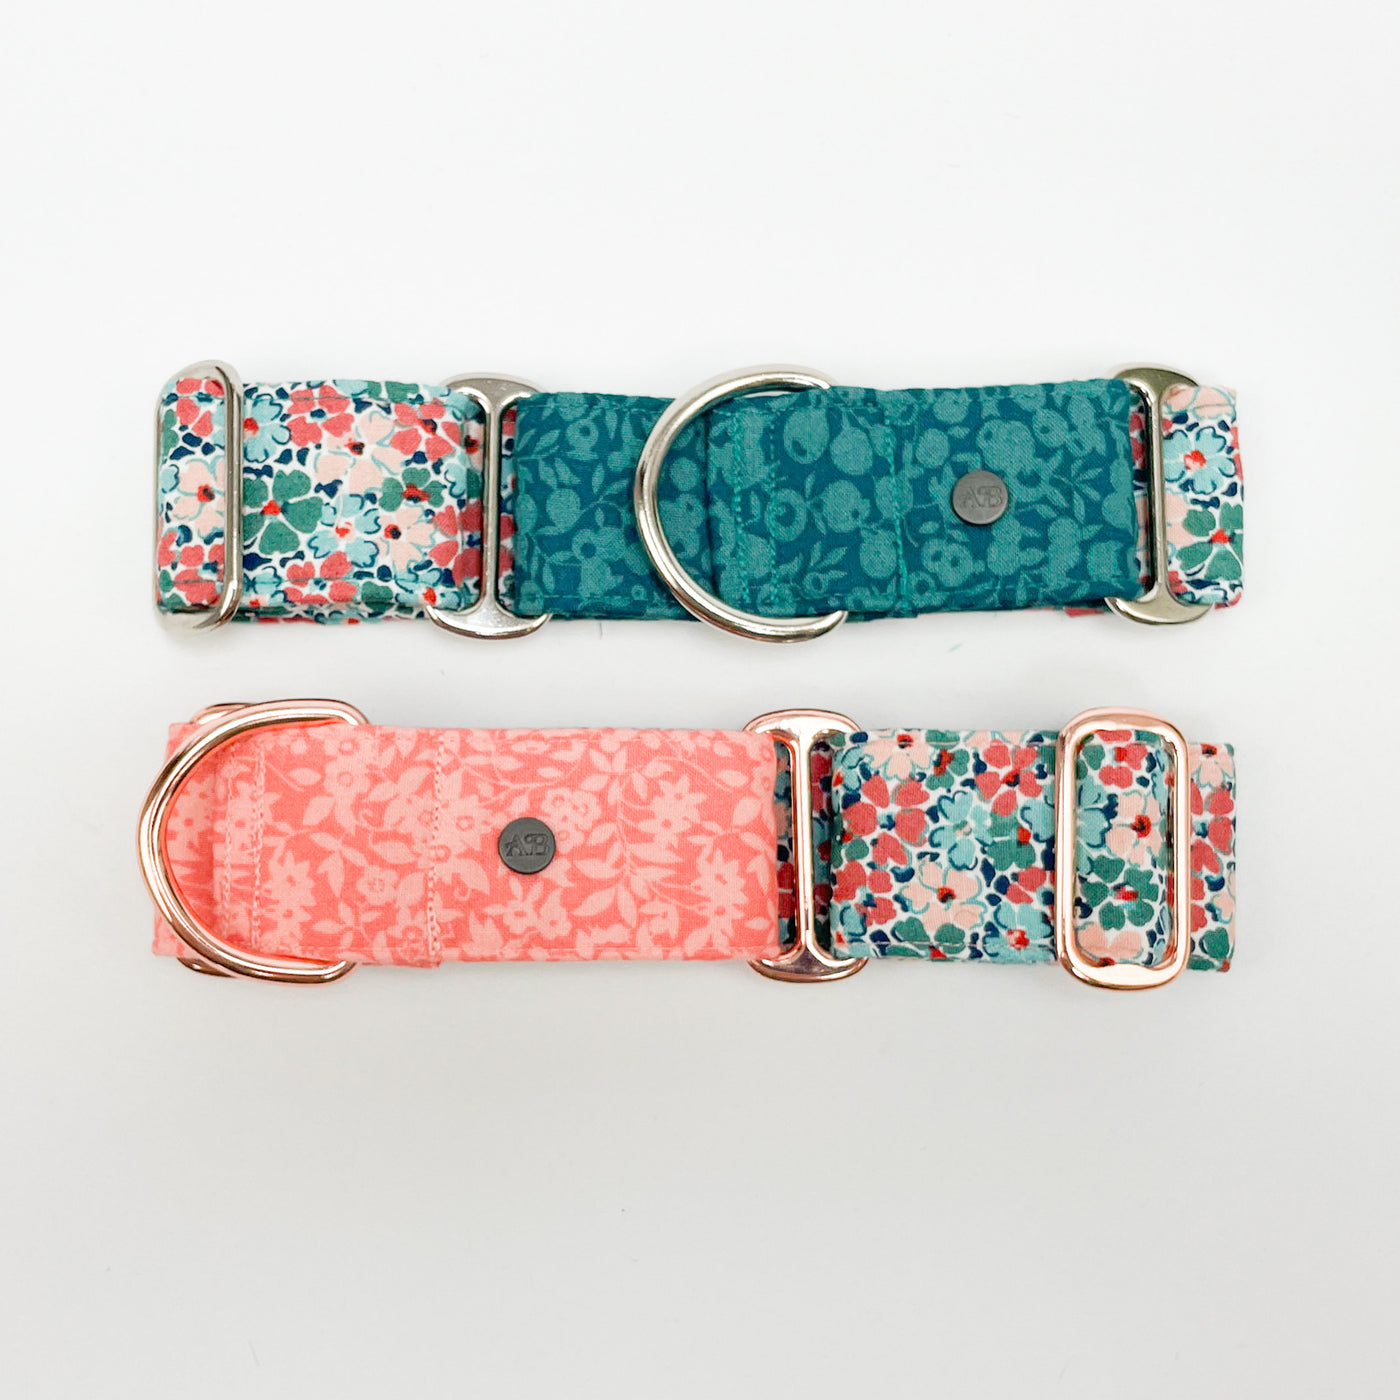 Albies boutique Liberty peach floral and winter floral martingale collar 